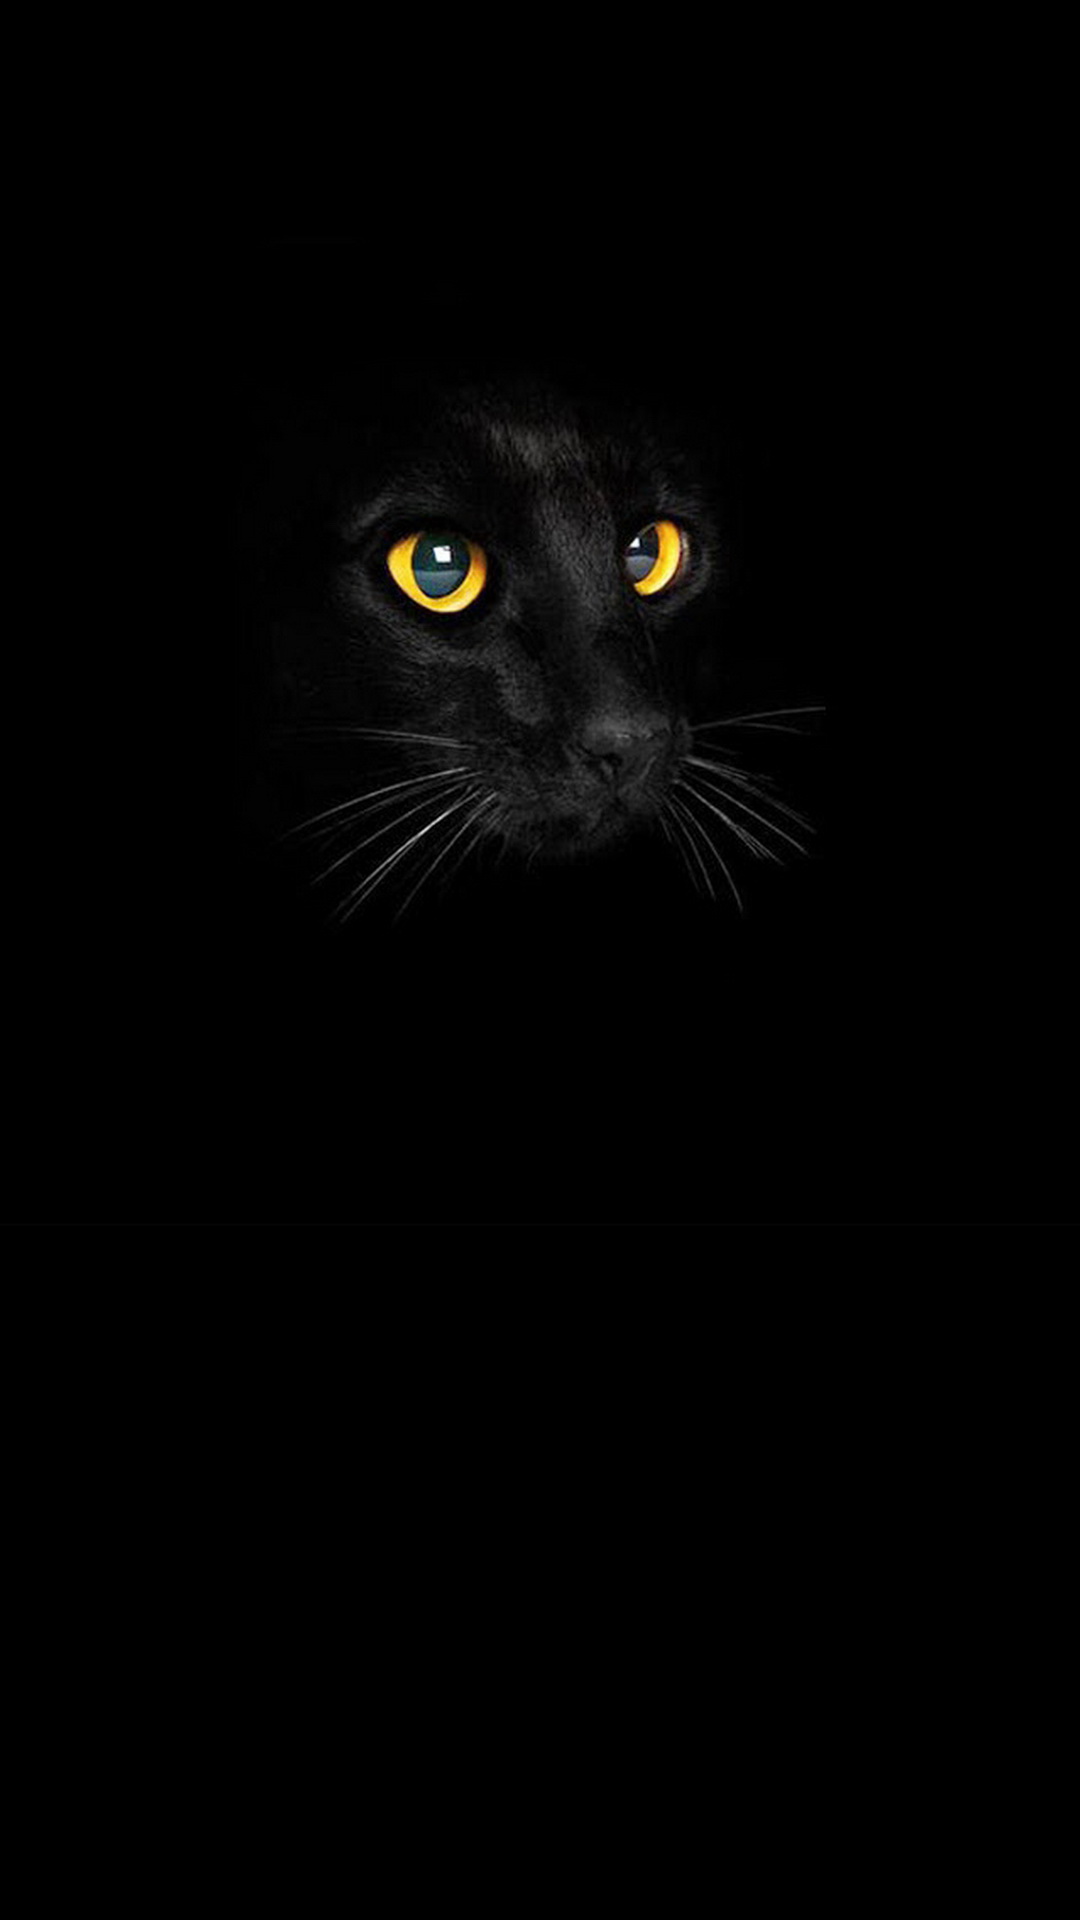 Download wallpaper 800x1420 cat black cat eyes dark iphone se5s5c5  for parallax hd background